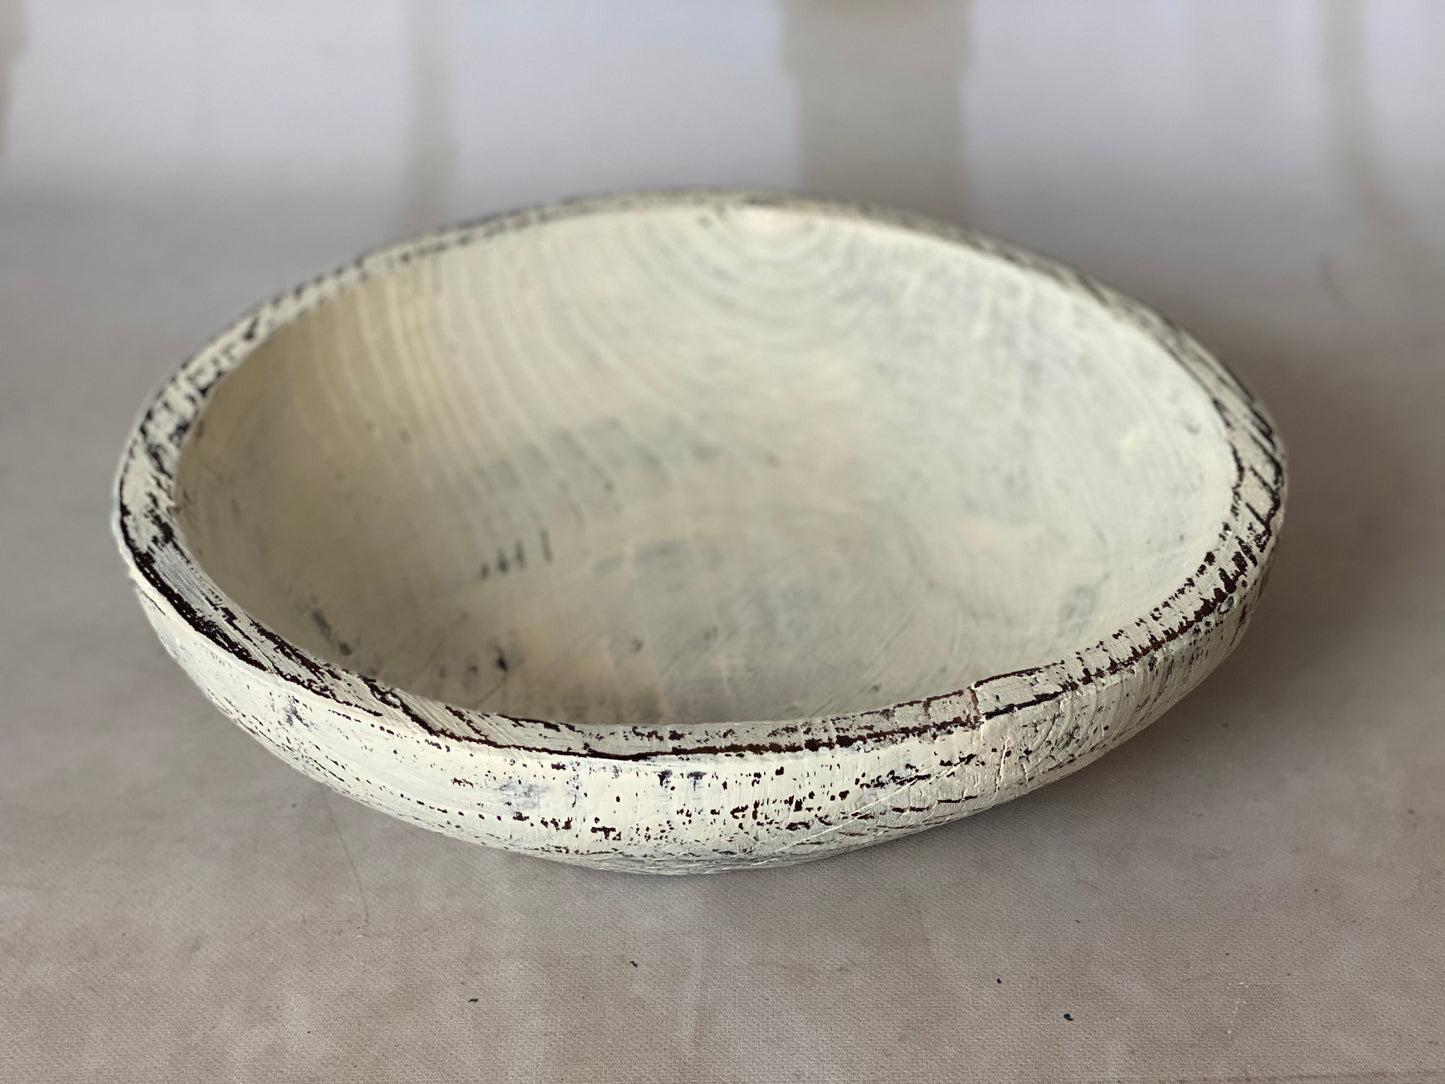 PRYMITIVE  BOWL - SHELL - UNIQUE - 3 sizes shallow, medium deep and deep